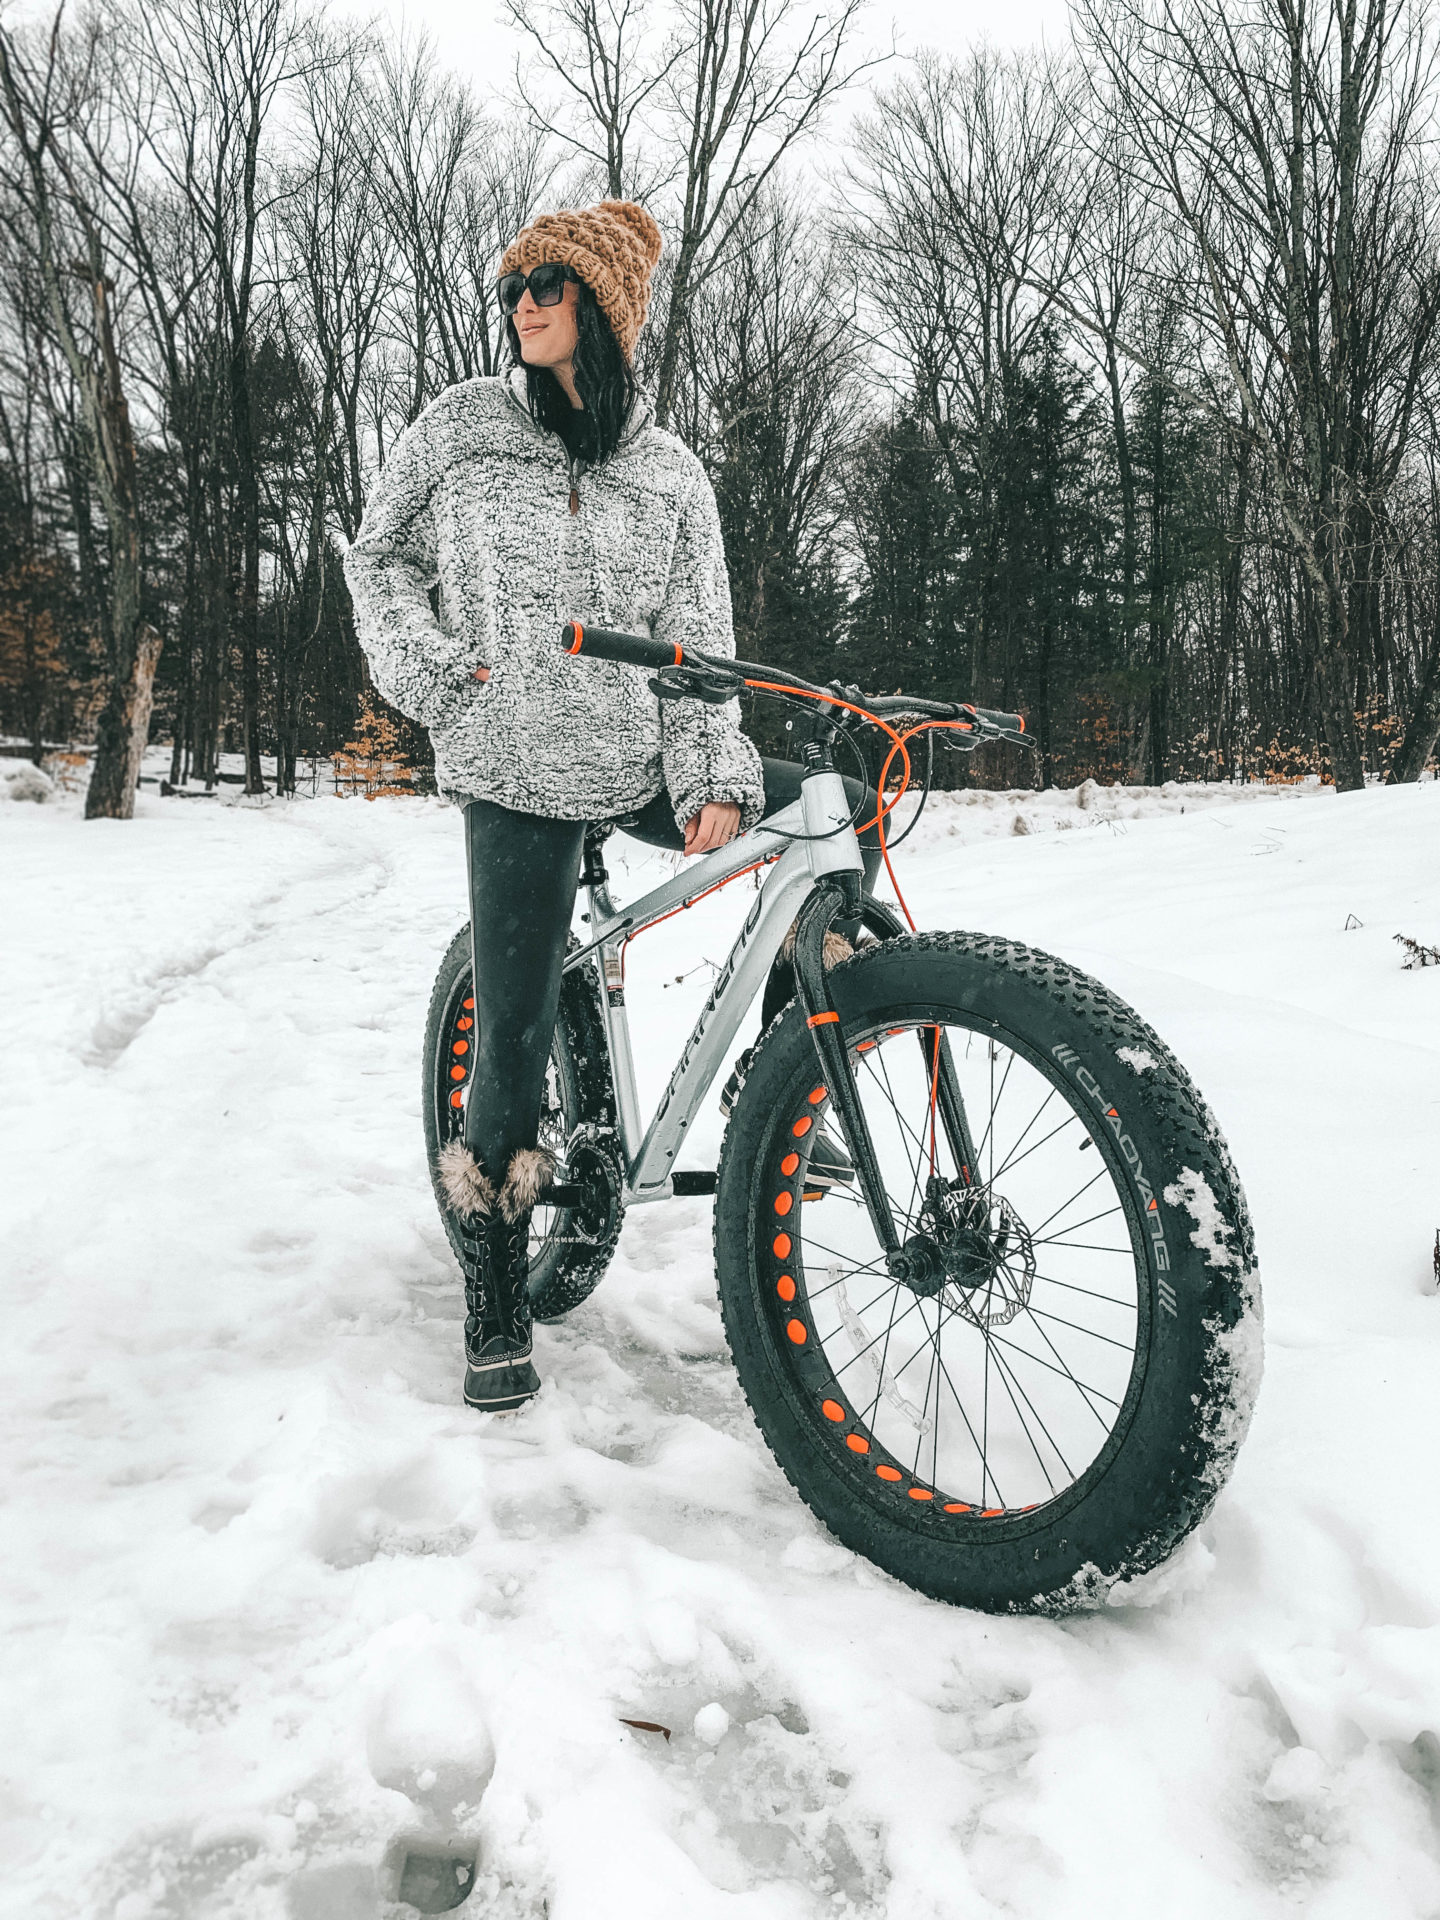 How to ride a fat bike in the snow